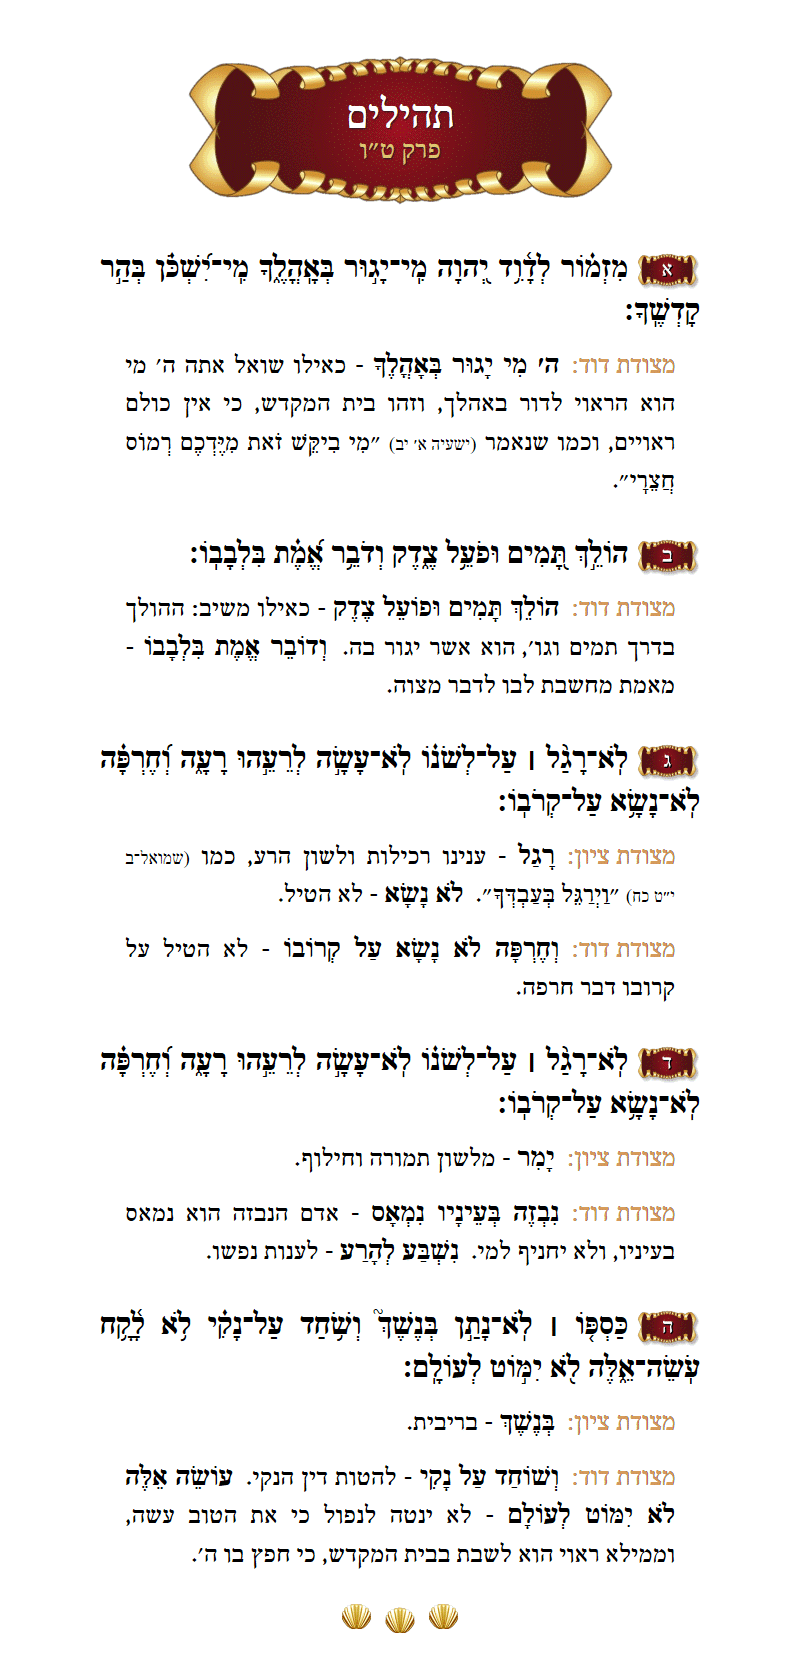 Sefer Tehillim Chapter 51 with commentary